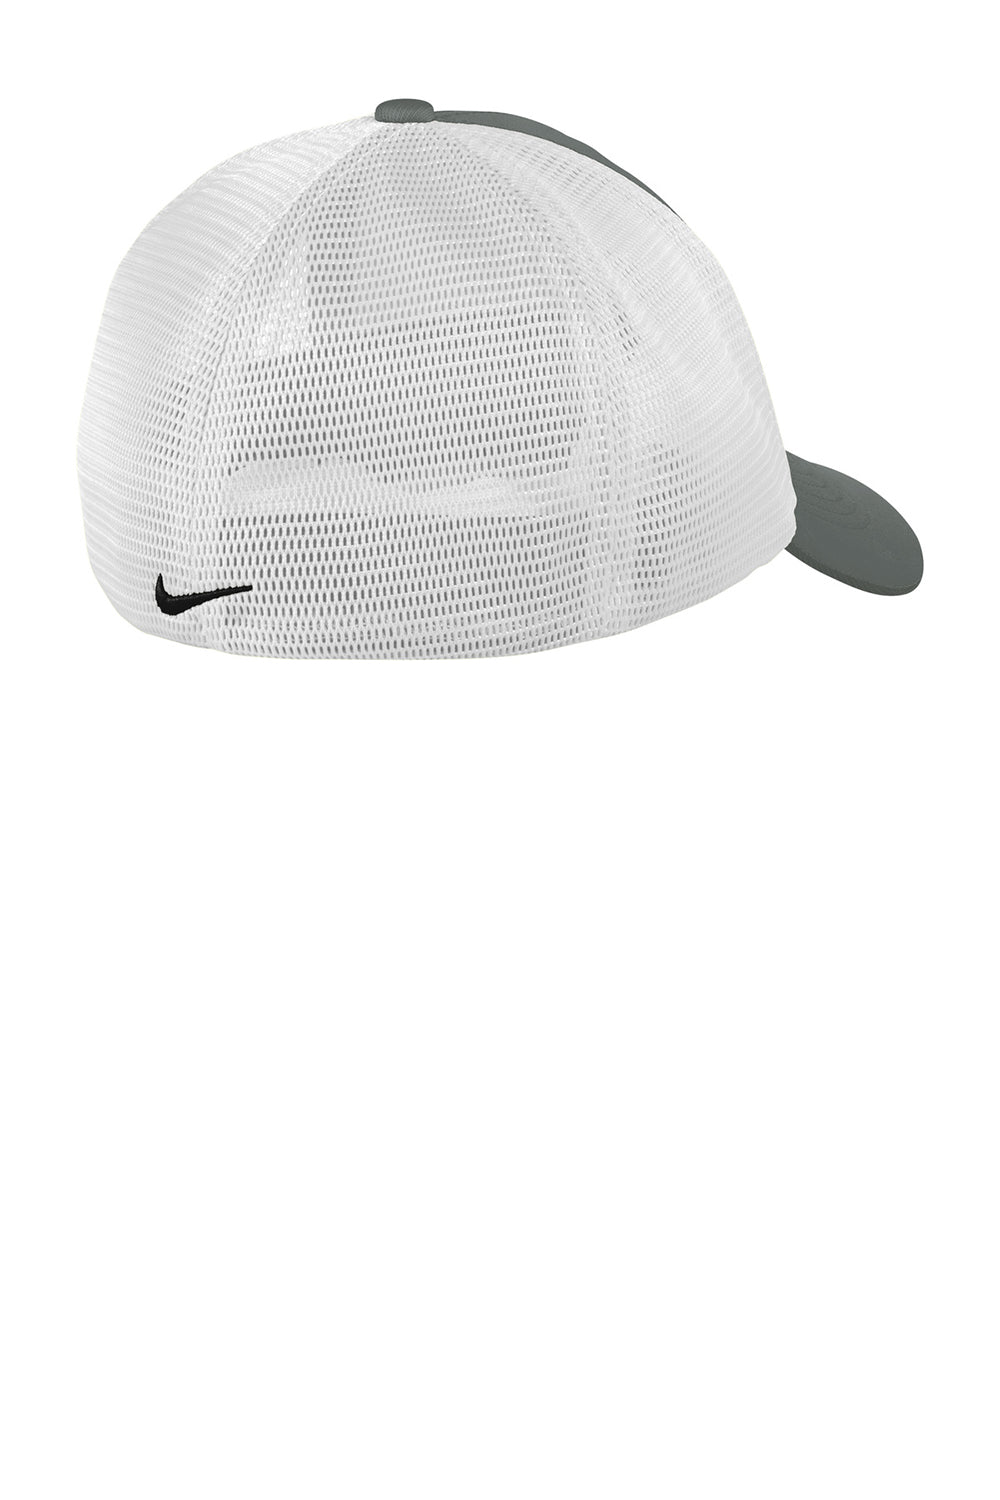 Nike NKAO9293/NKFB6448 Mens Dri-Fit Moisture Wicking Stretch Fit Hat Anthracite Grey/White Flat Back